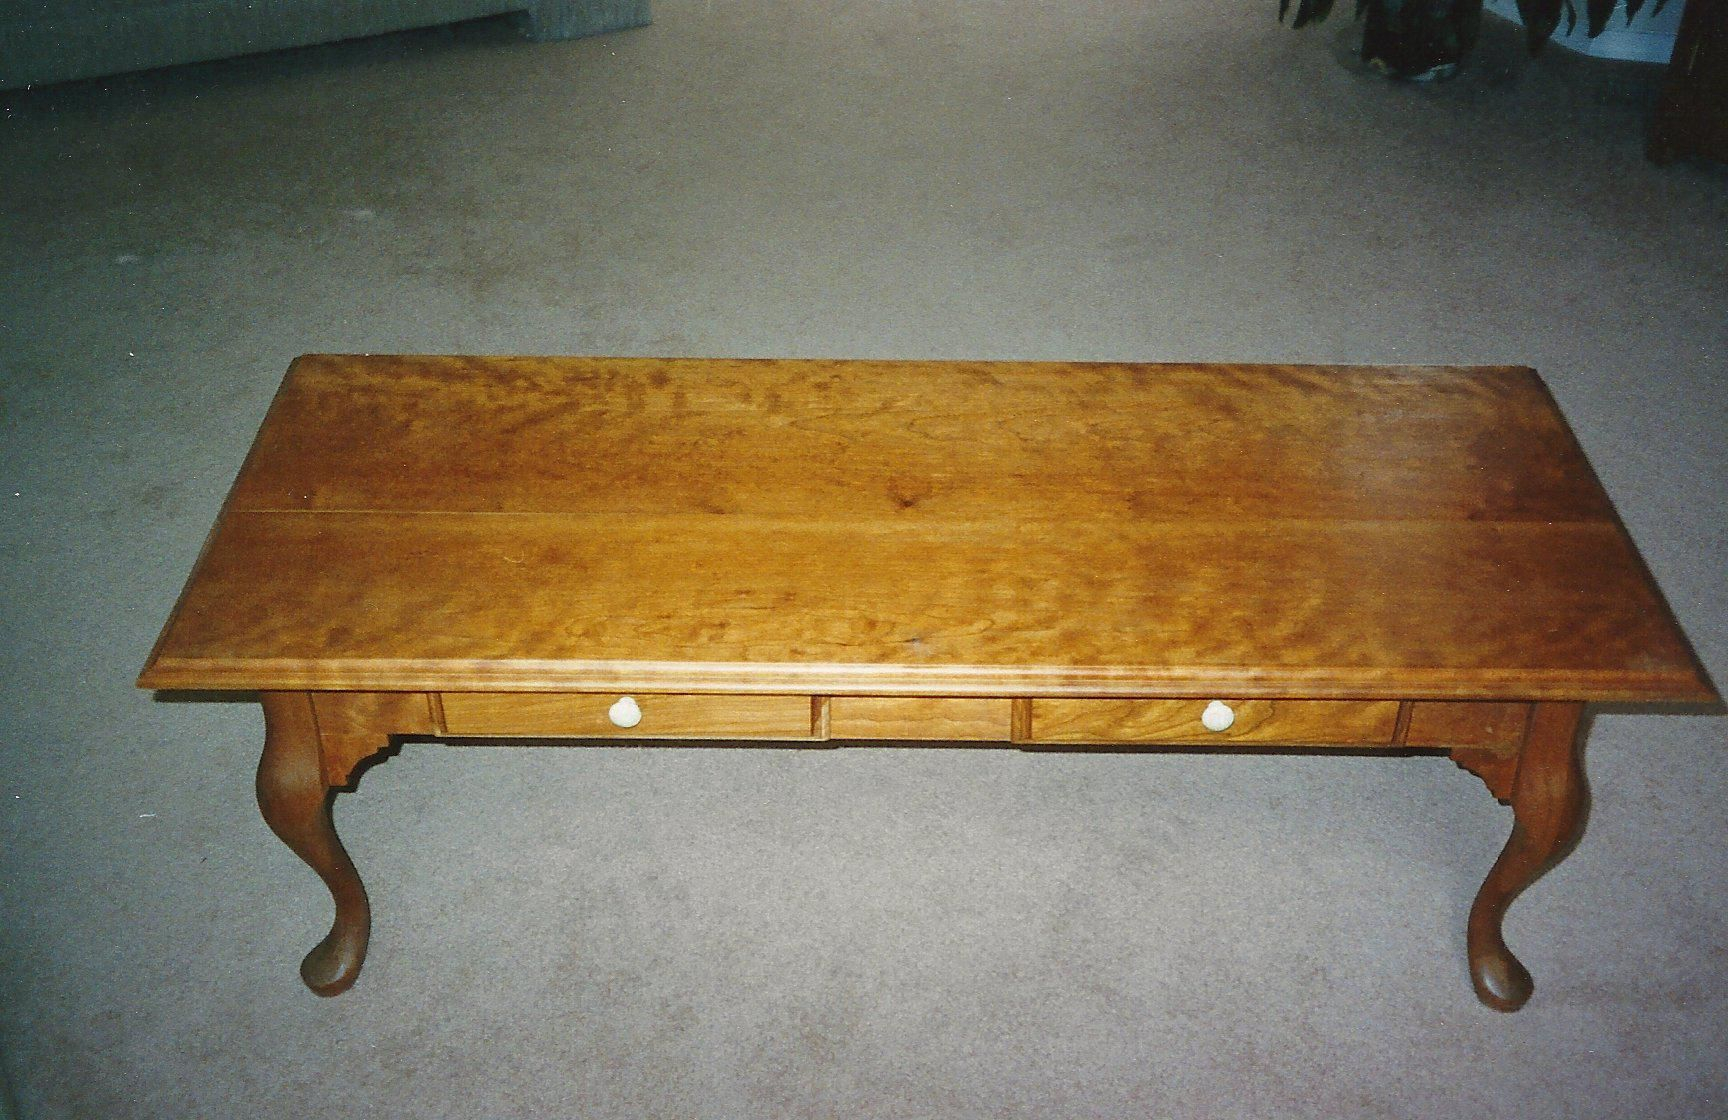 Custom Made Cherry Queen Anne Coffee Table Fwc Woodworking within sizing 1728 X 1120